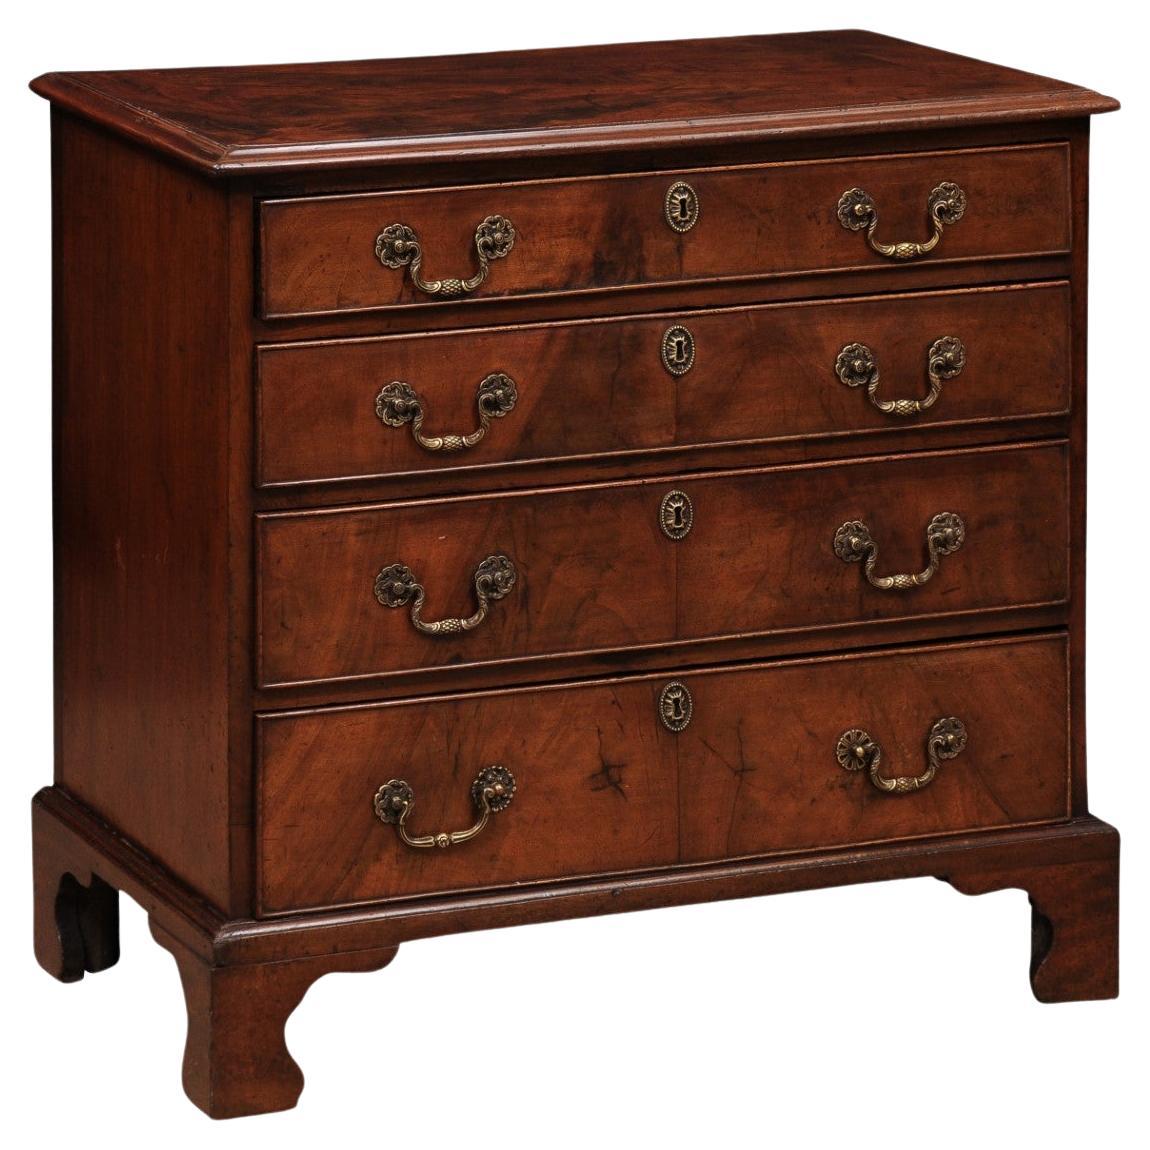 Small 18th Century English Mahogany Bachelor’s Chest with 4 Drawers and Bracket